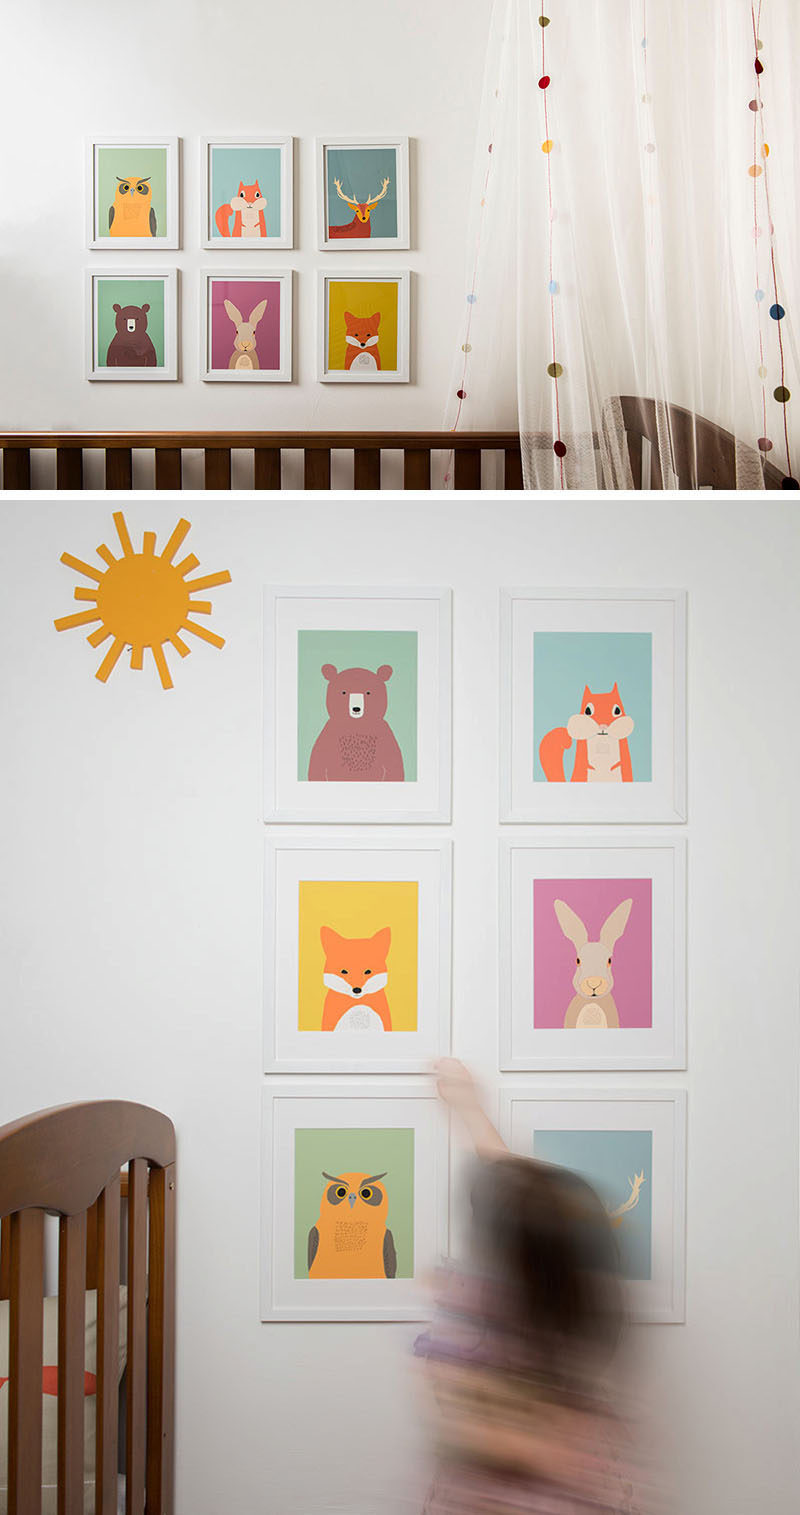 15 Decor Ideas For Creating A Woodland Nursery Design // Include your favorite woodland creatures in the nursery with cartoon prints on colorful backgrounds that are in keeping with the other colors in the room.